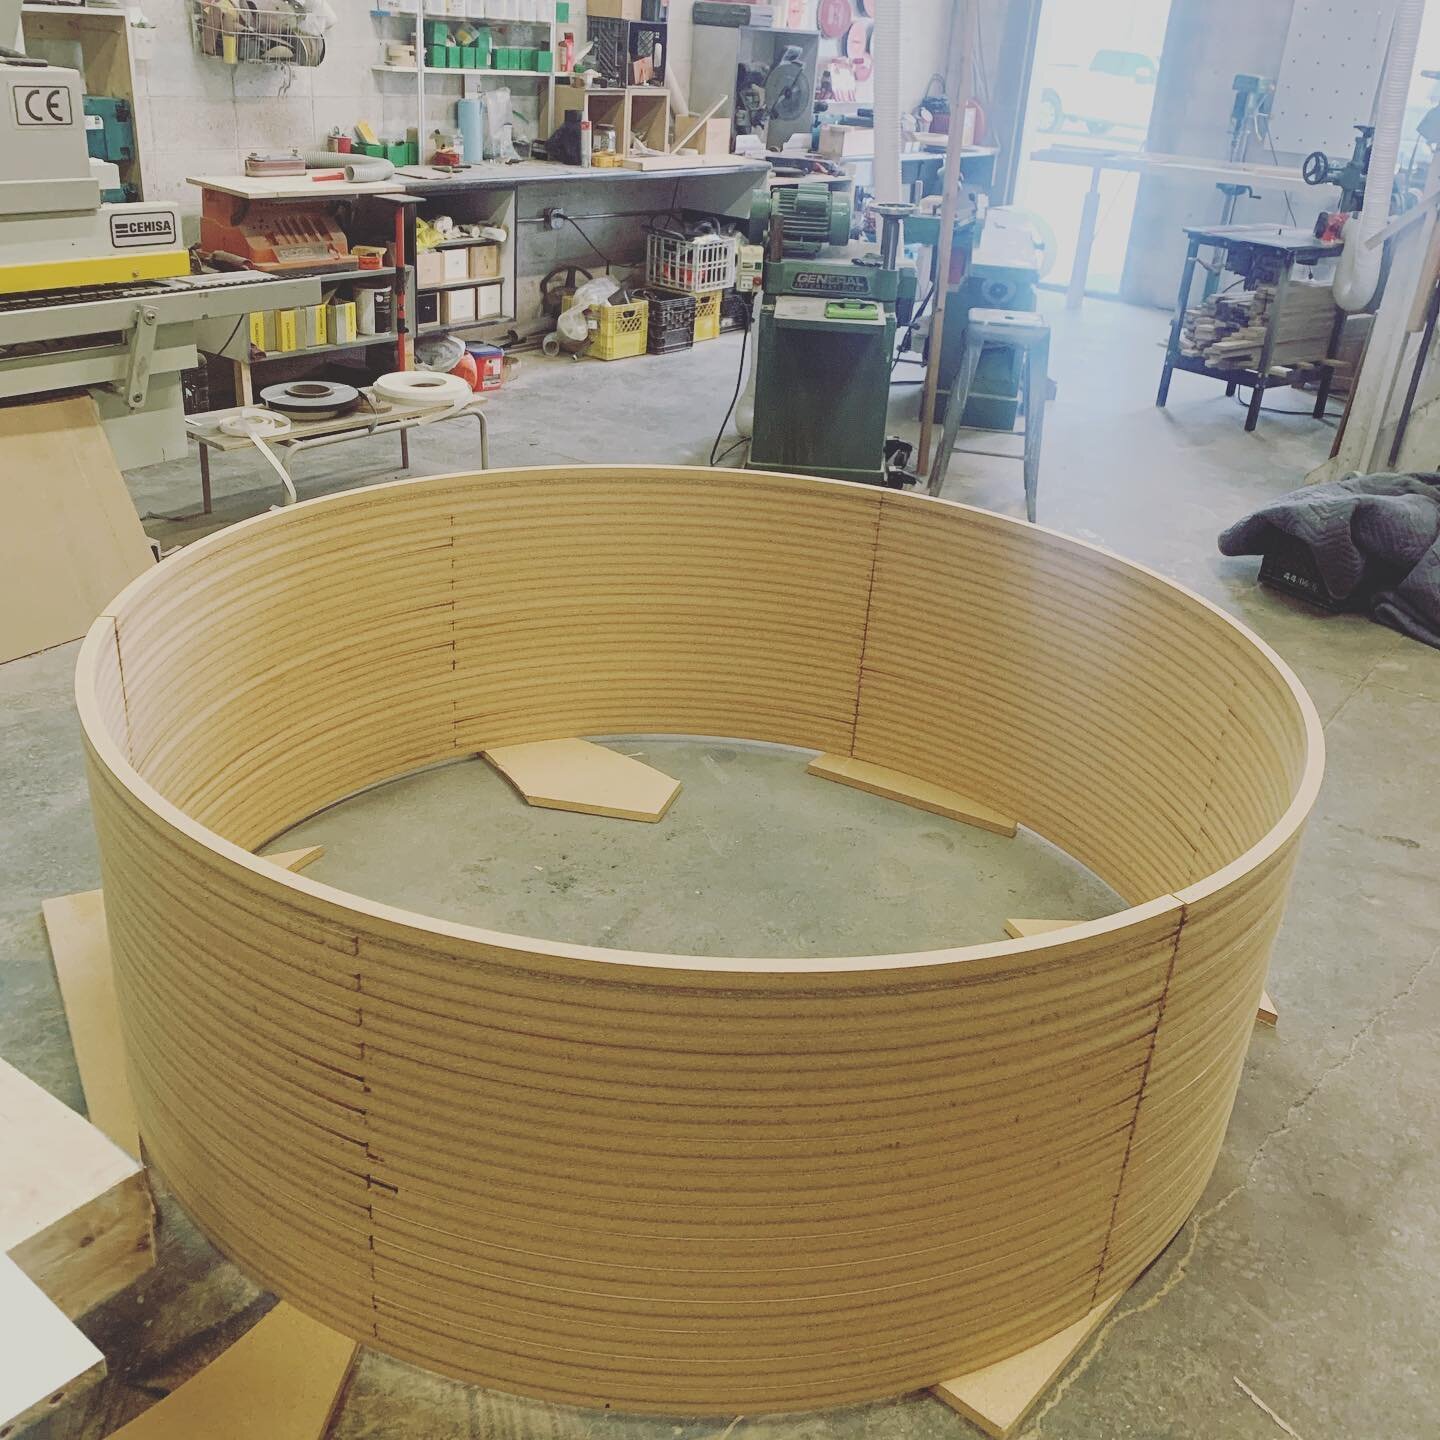 It not going to be a hot tub. #millwork #edmonton #cabinet #yeg #interiordecor